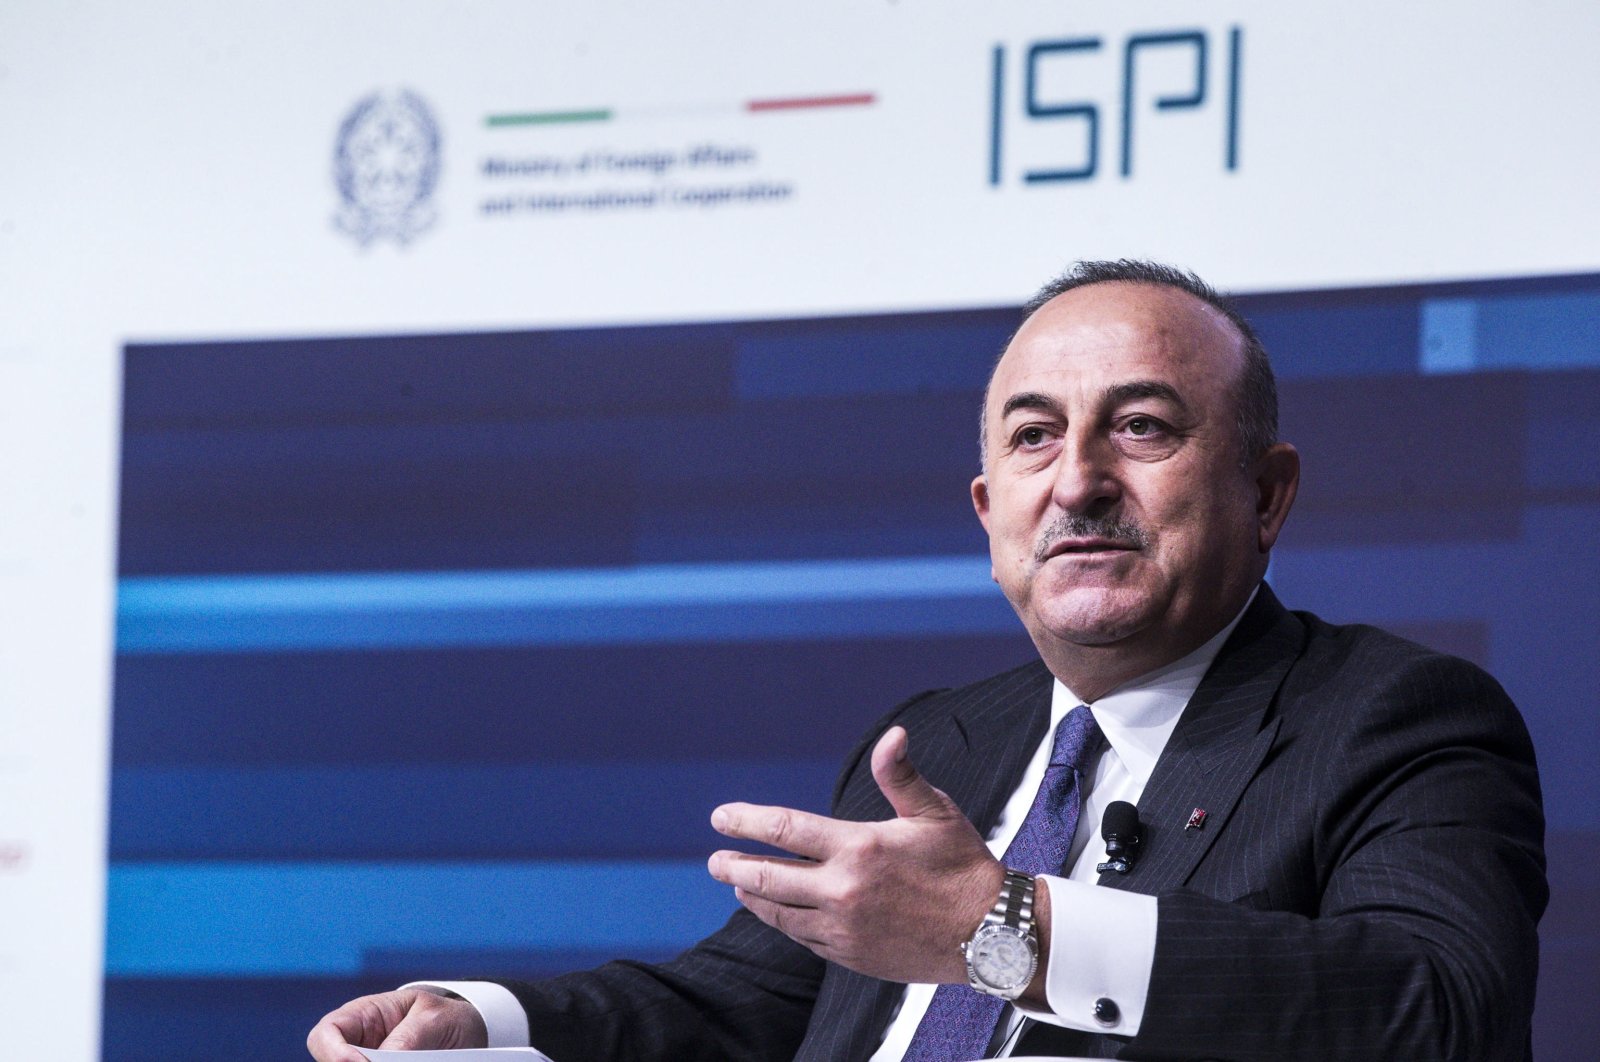 Foreign Minister Mevlüt Çavuşoğlu attends a panel during the Rome Med 2022, Mediterranean Dialogues conference in Rome, Italy, Dec. 2, 2022. (EPA Photo)